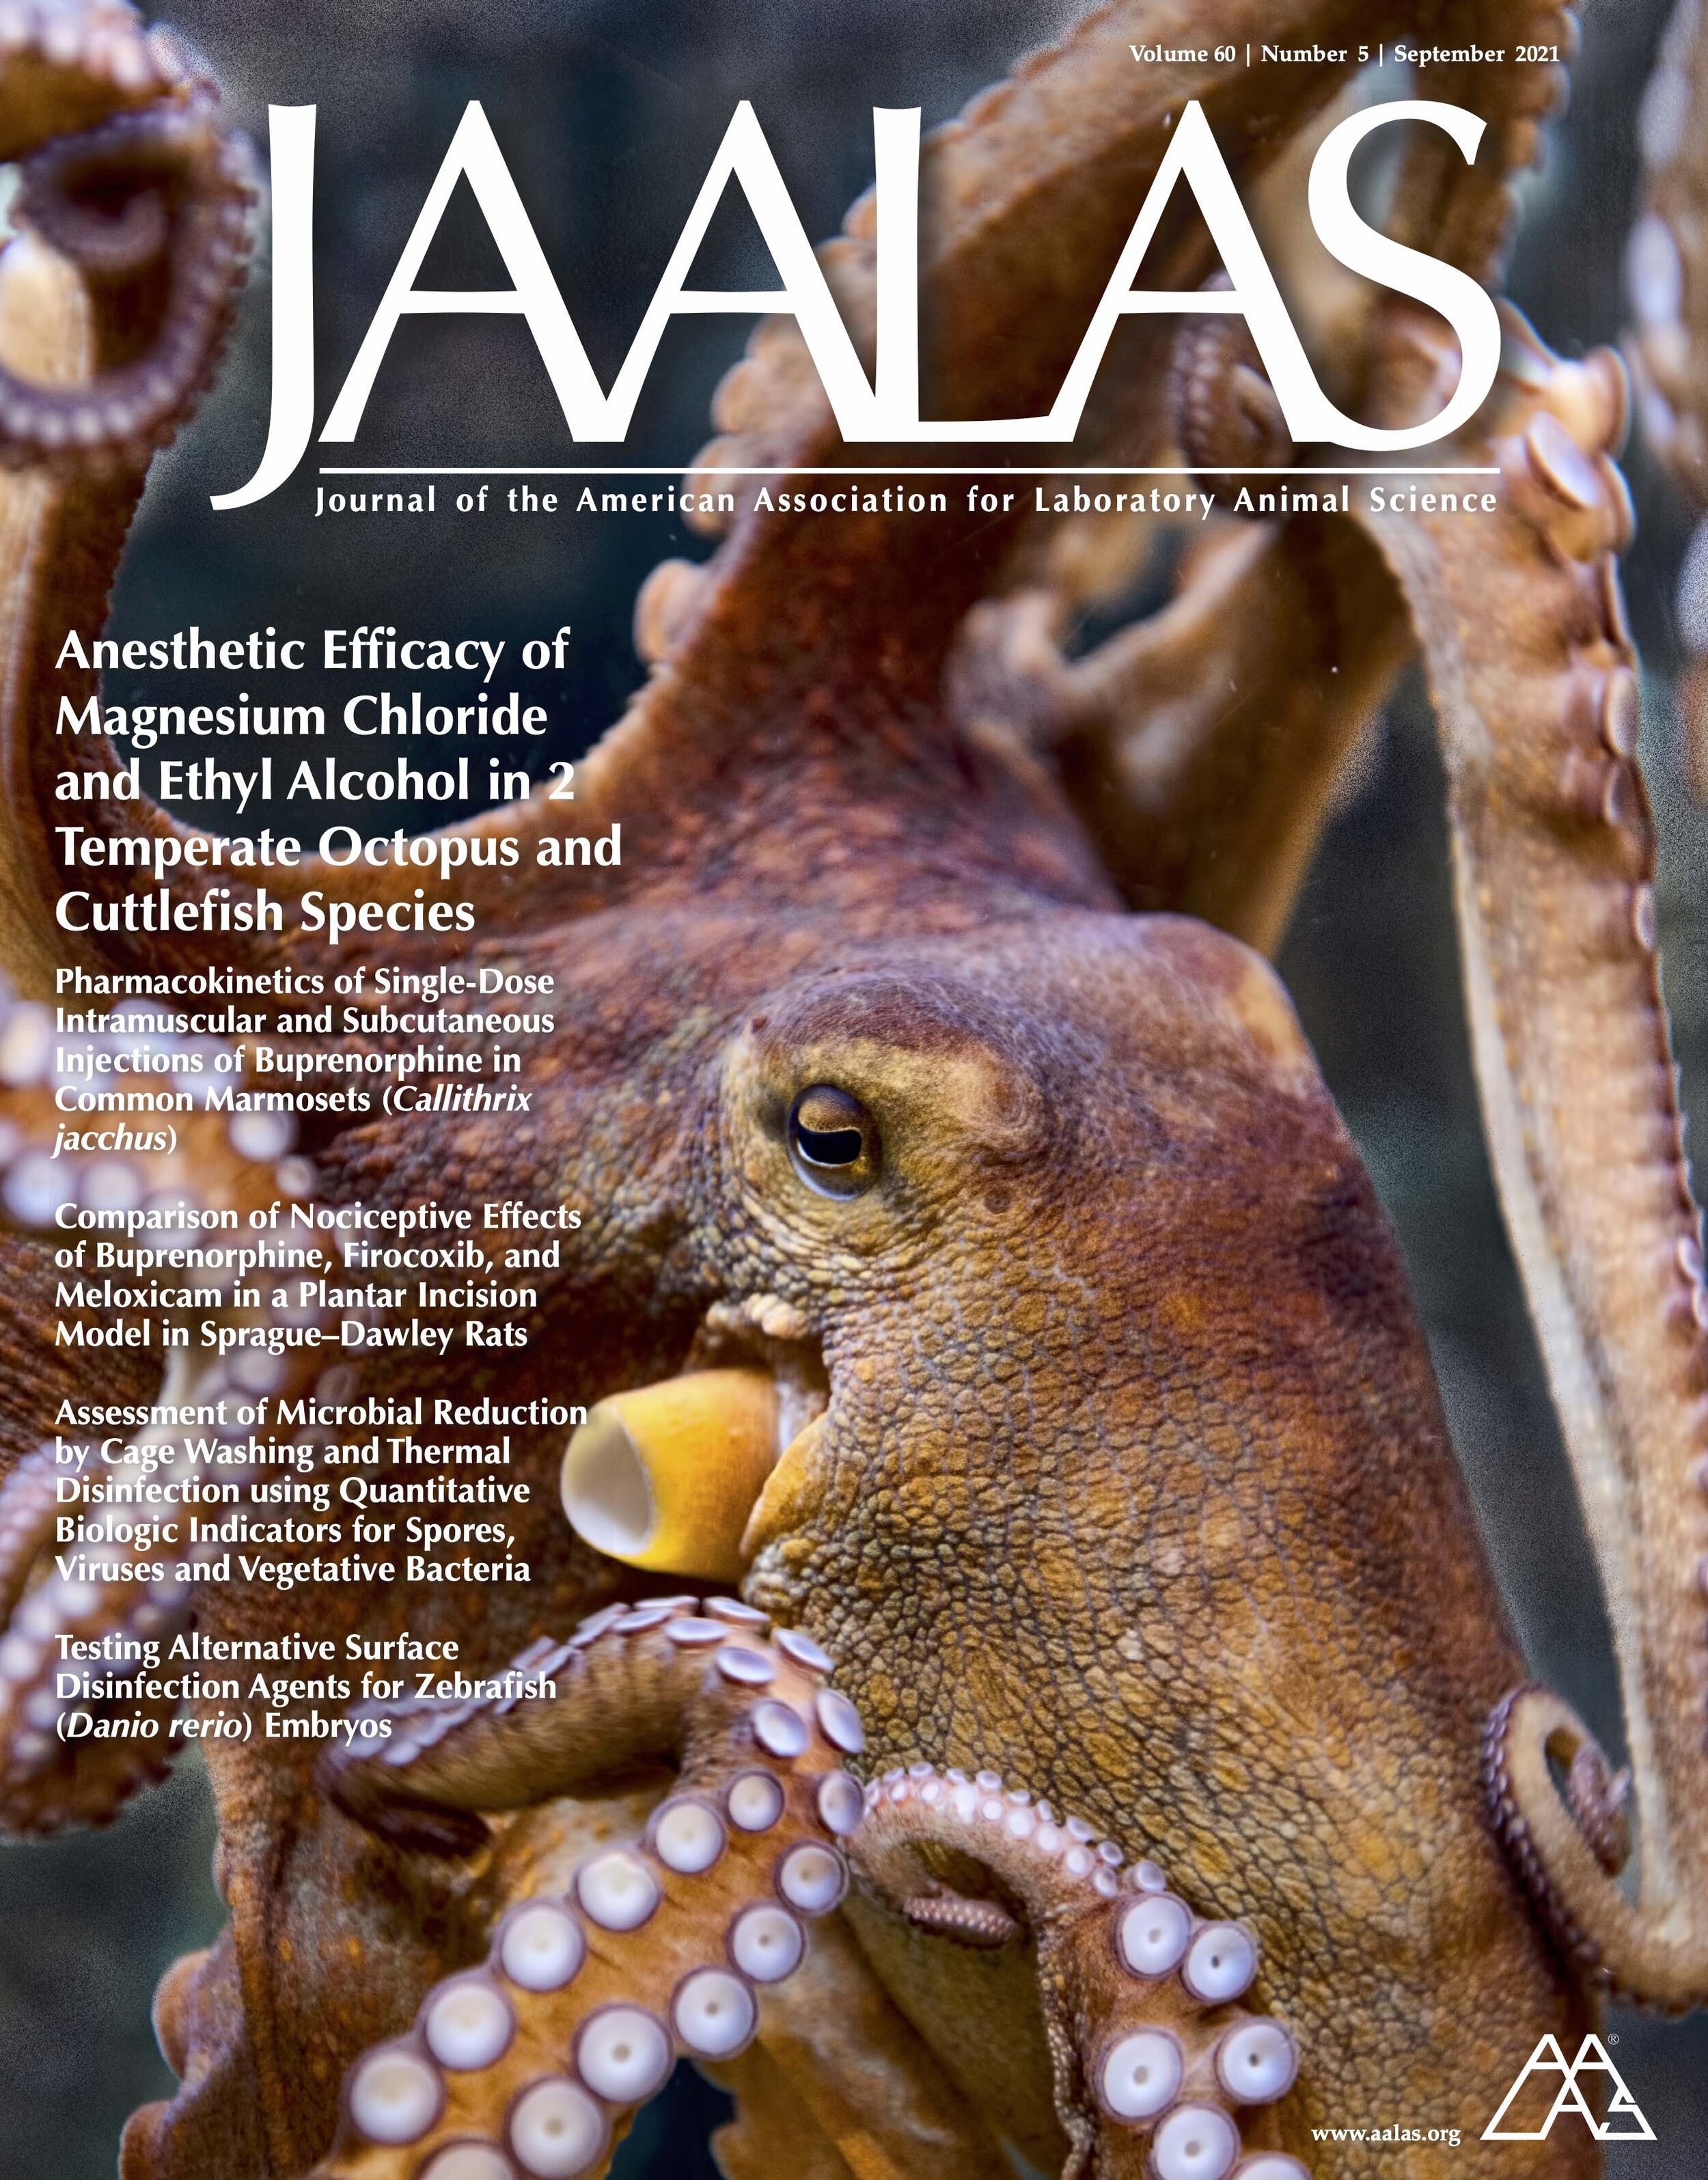 The Crook Lab gets the cover of JAALAS! — Crook Laboratory